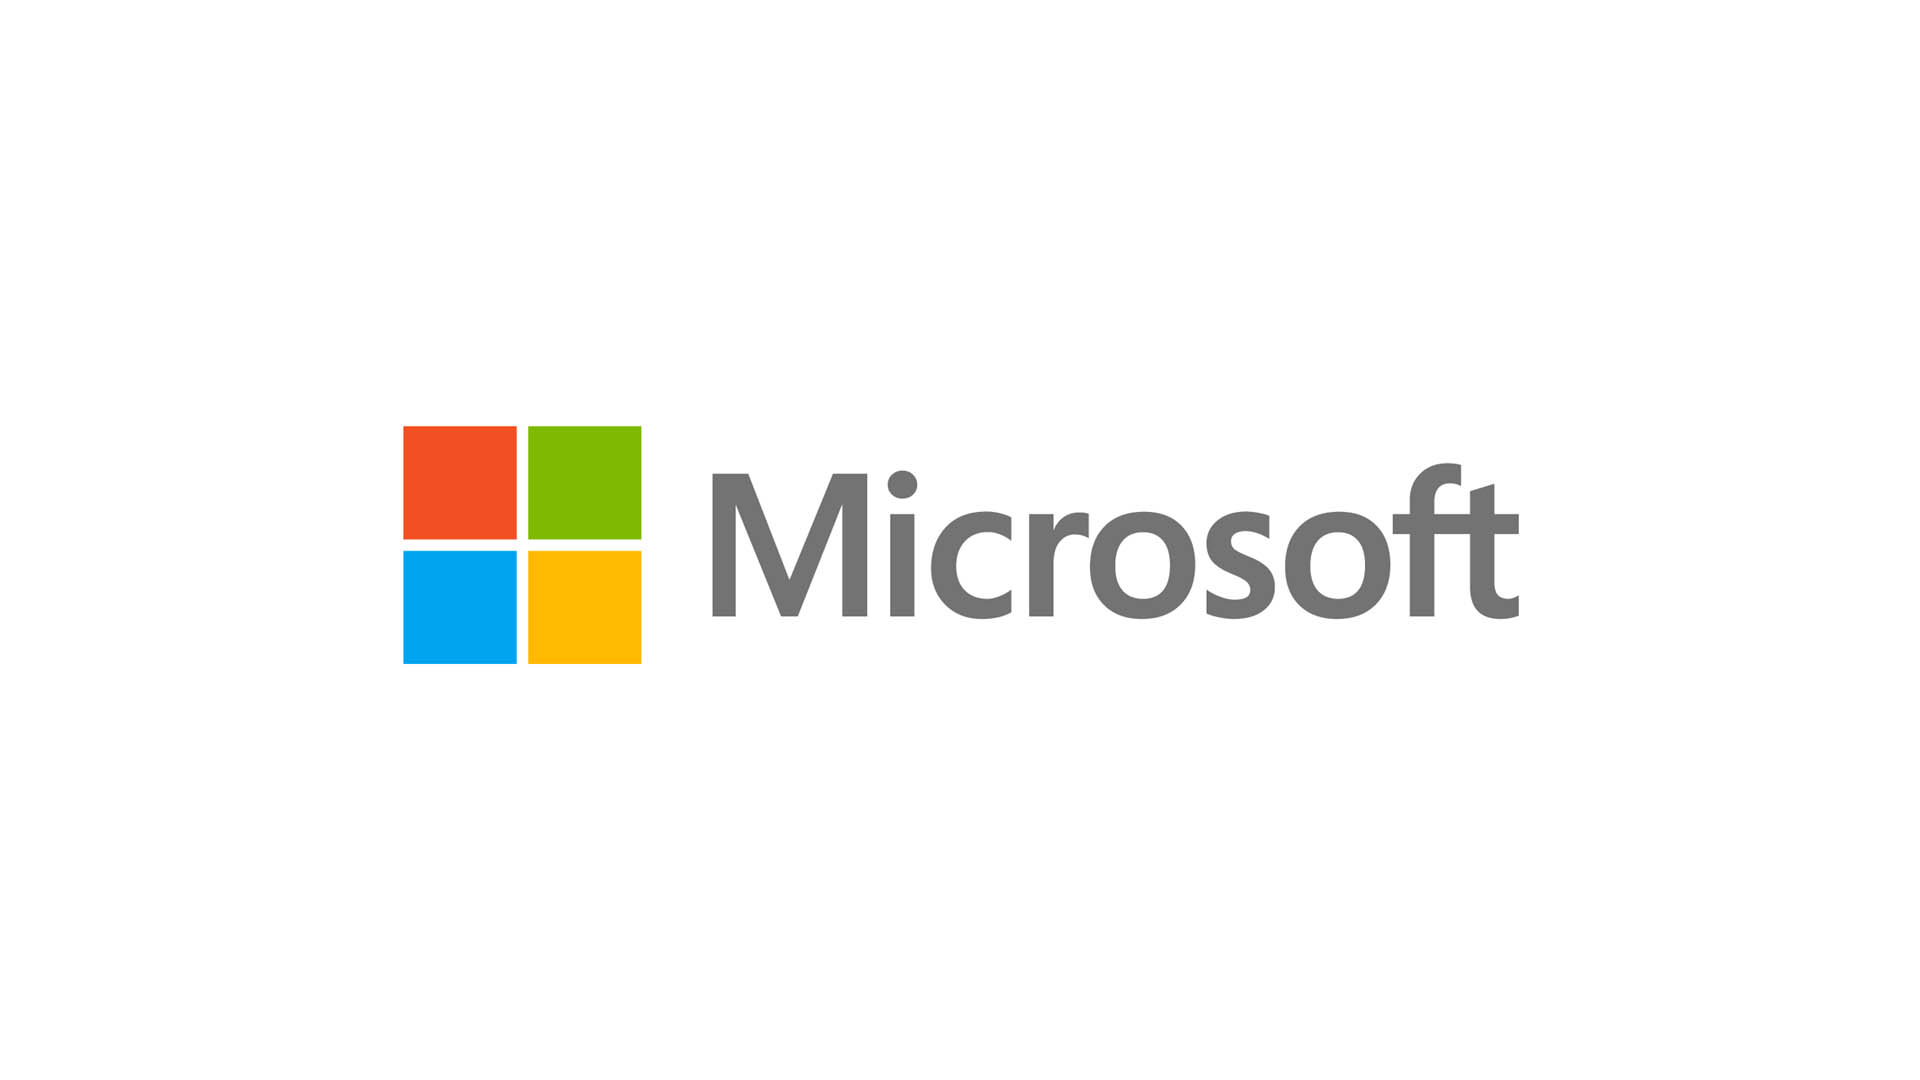 EXCLUSIVE-Microsoft to separate Teams and Office globally amid antitrust scrutiny